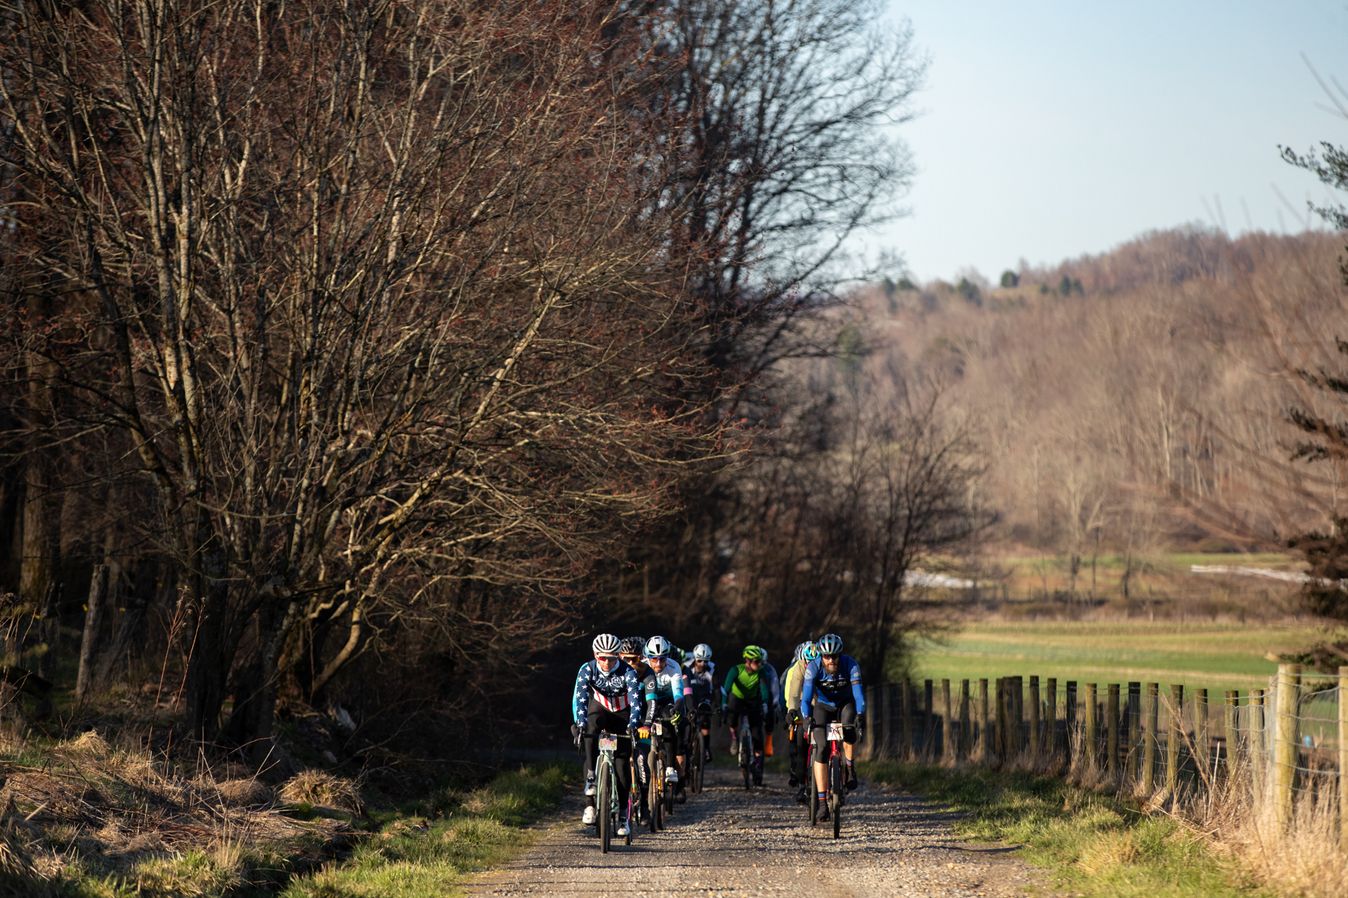 The peloton takes on the gravel roads of Floyd County, Virginia at the Appalachian Journey